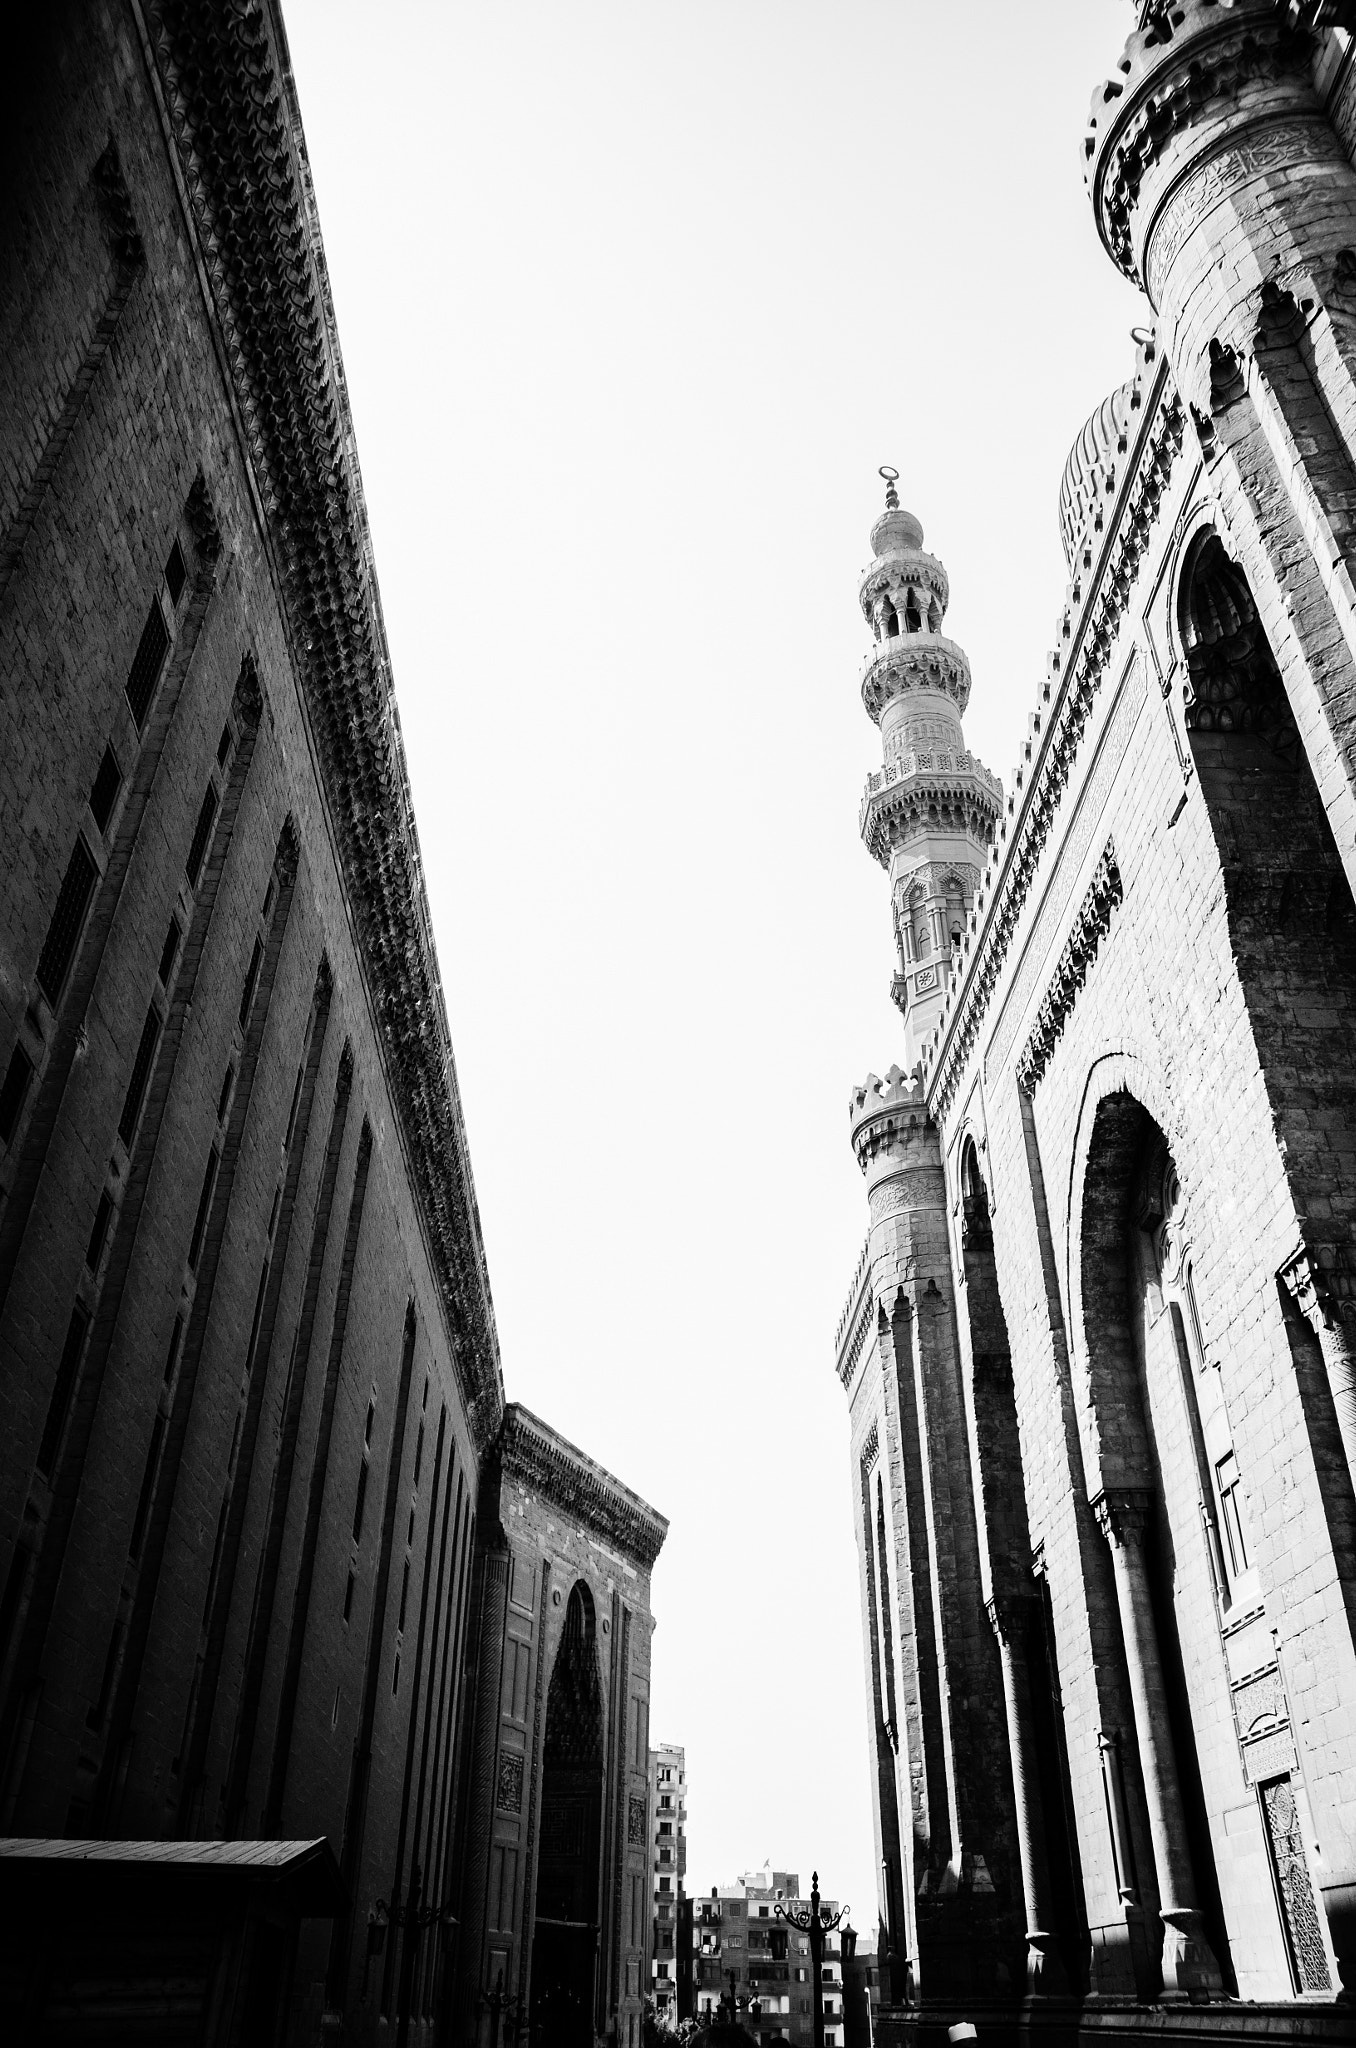 Nikon D5100 + Sigma 17-70mm F2.8-4 DC Macro OS HSM | C sample photo. Mosques in old egypt photography